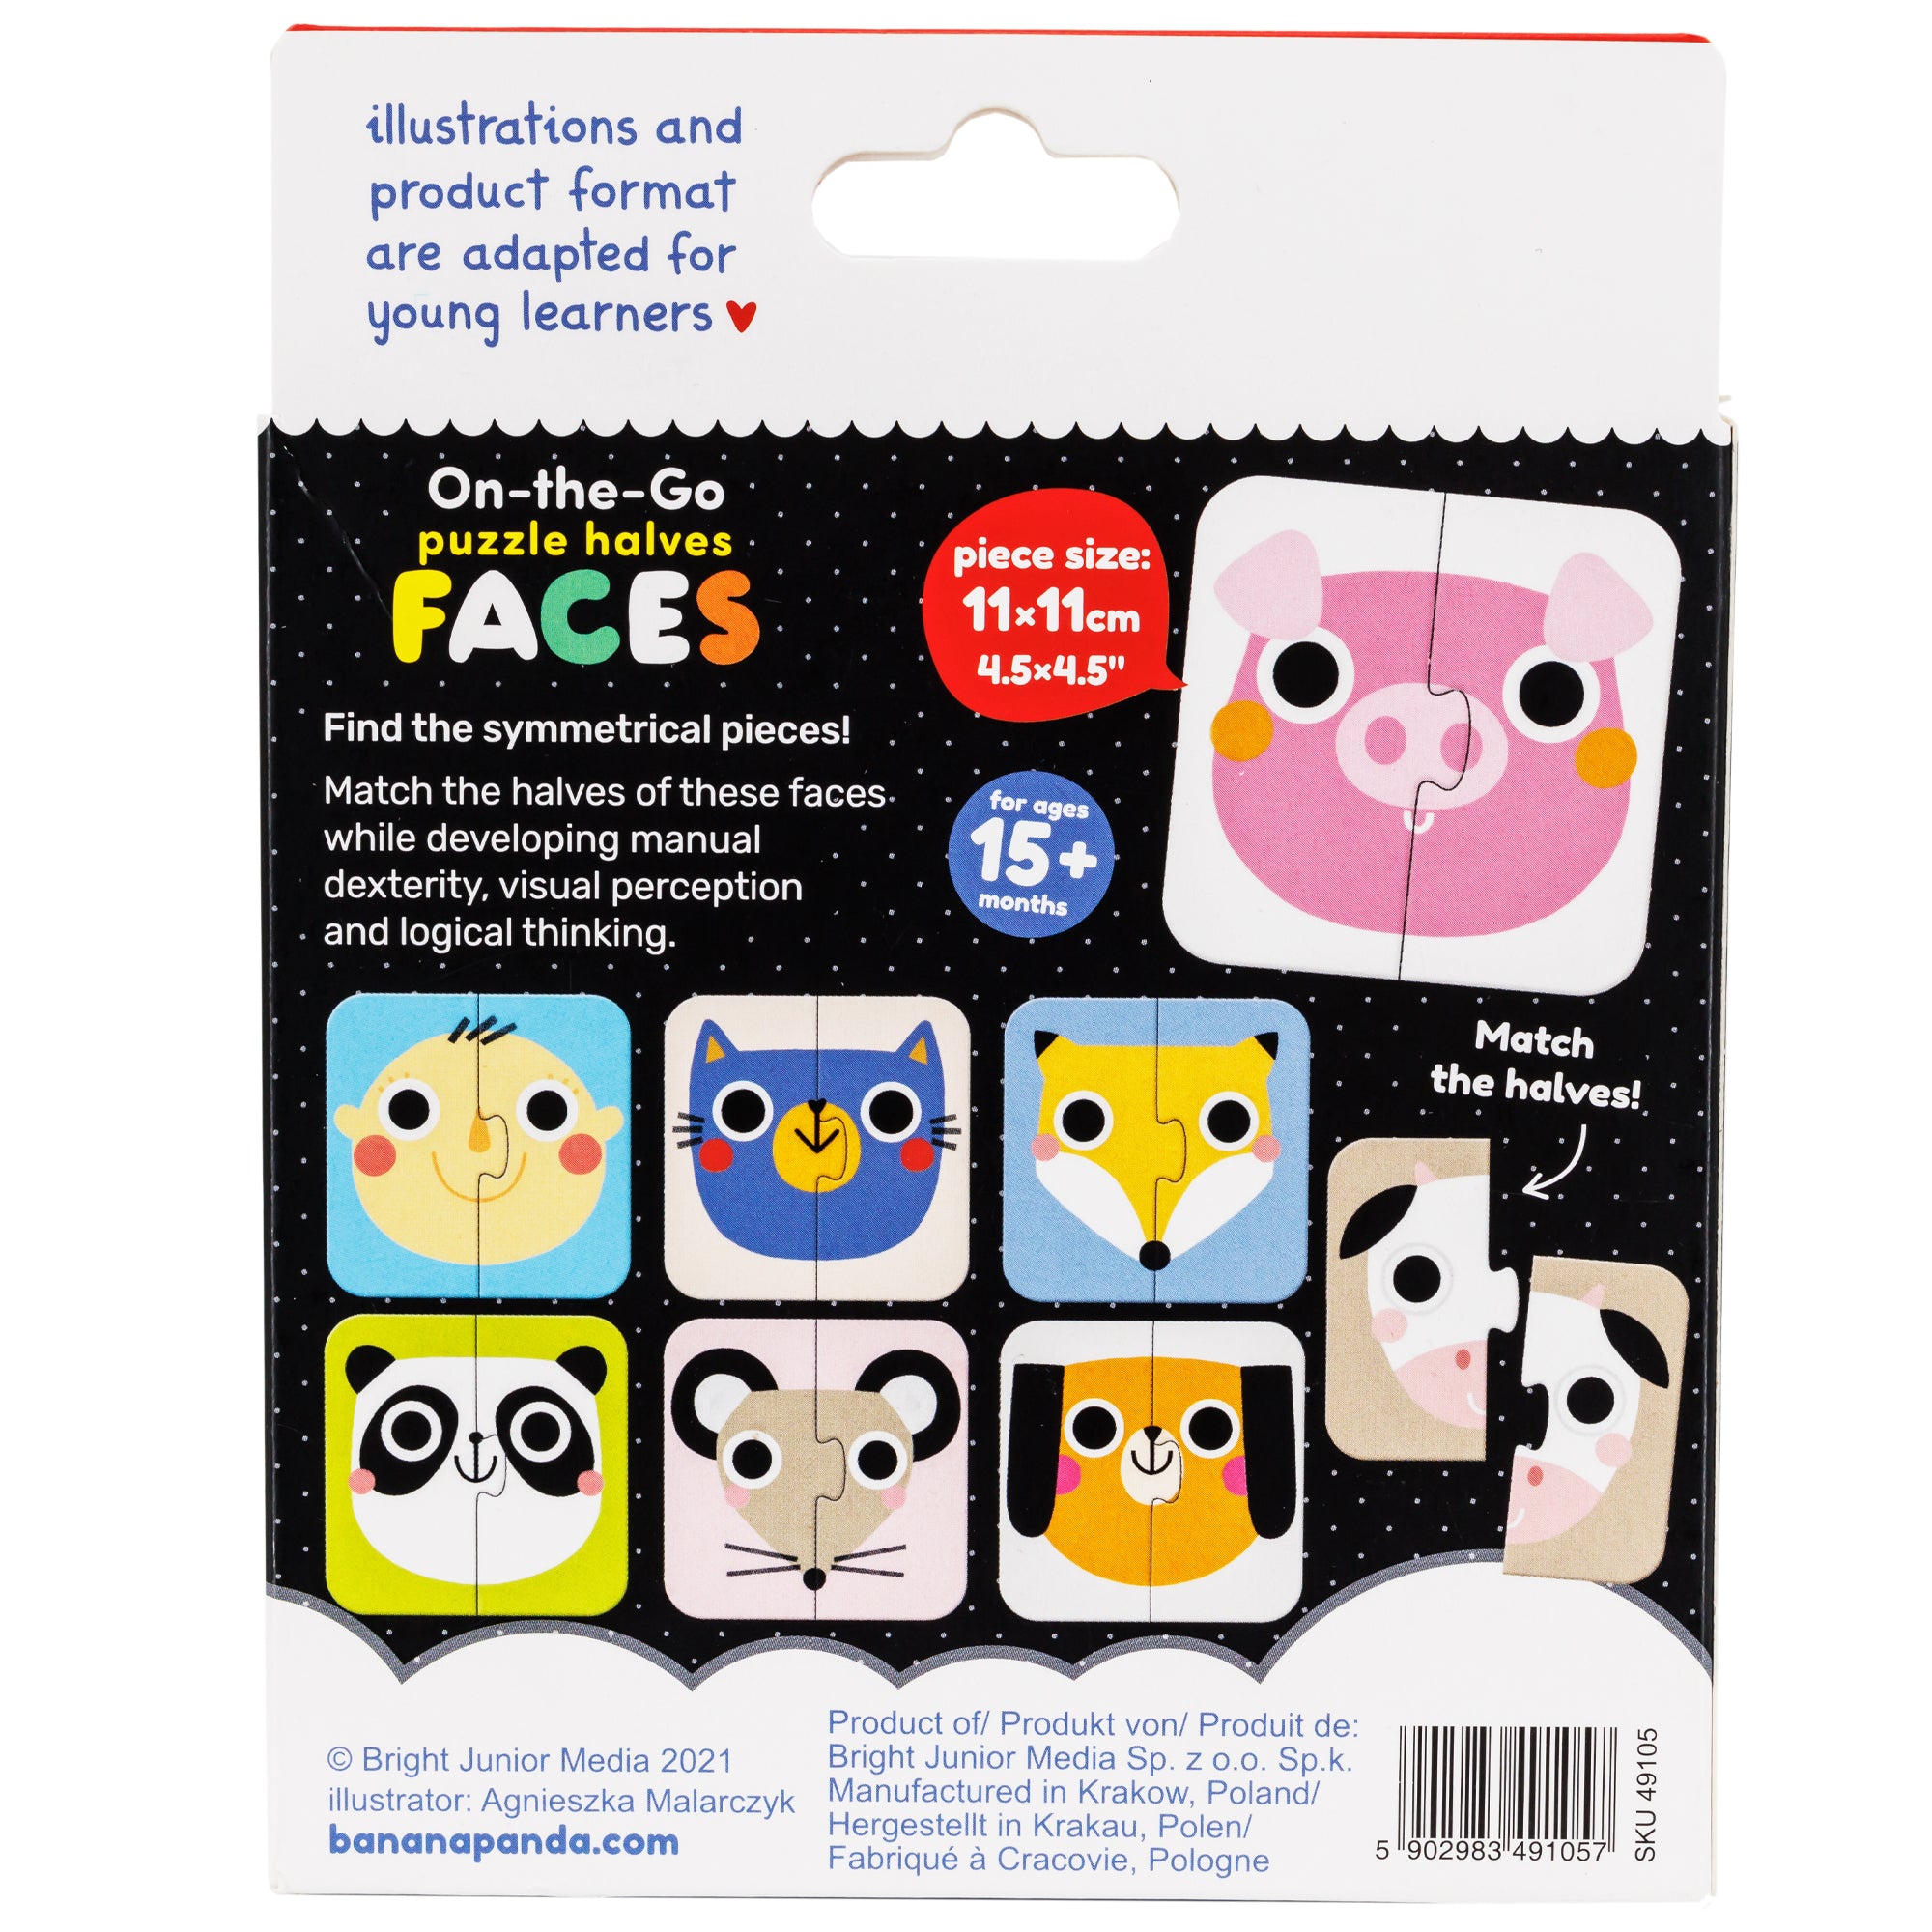 On the Go, Puzzle Halves, Faces packaging back. The back is white on top and bottom and black with white polka dots in the middle. Inside the black area, you can see several puzzles, including a pig, baby, cat, fox, panda, mouse, dog, and a cow. The cow puzzle is separated with the words “match the halves” written in white above with an arrow pointing to the puzzle.